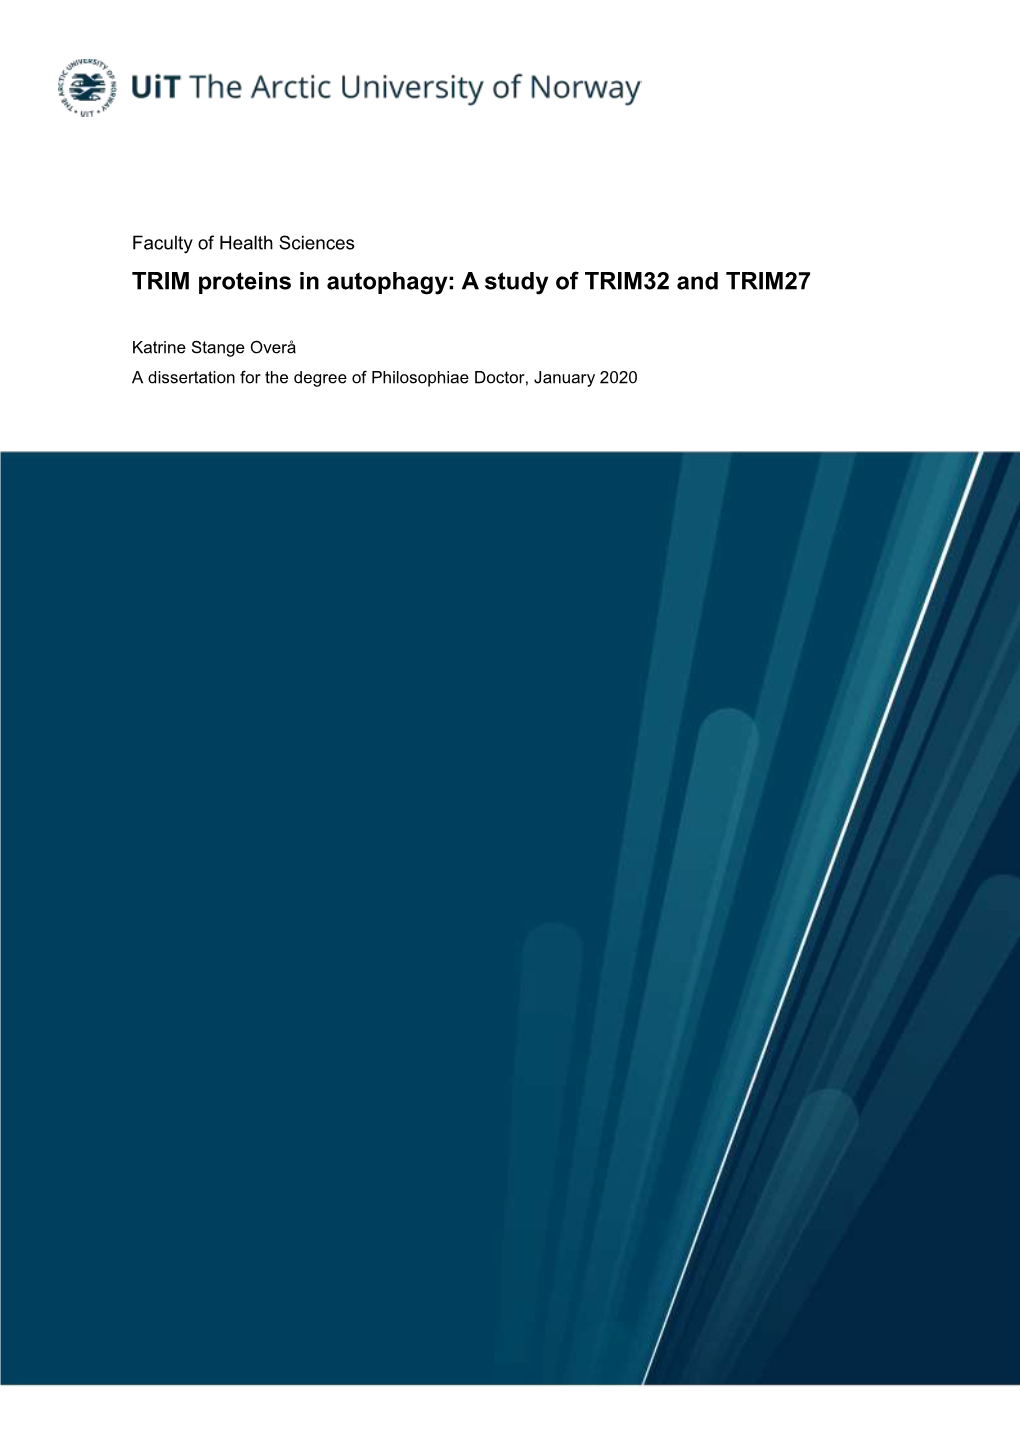 TRIM Proteins in Autophagy: a Study of TRIM32 and TRIM27